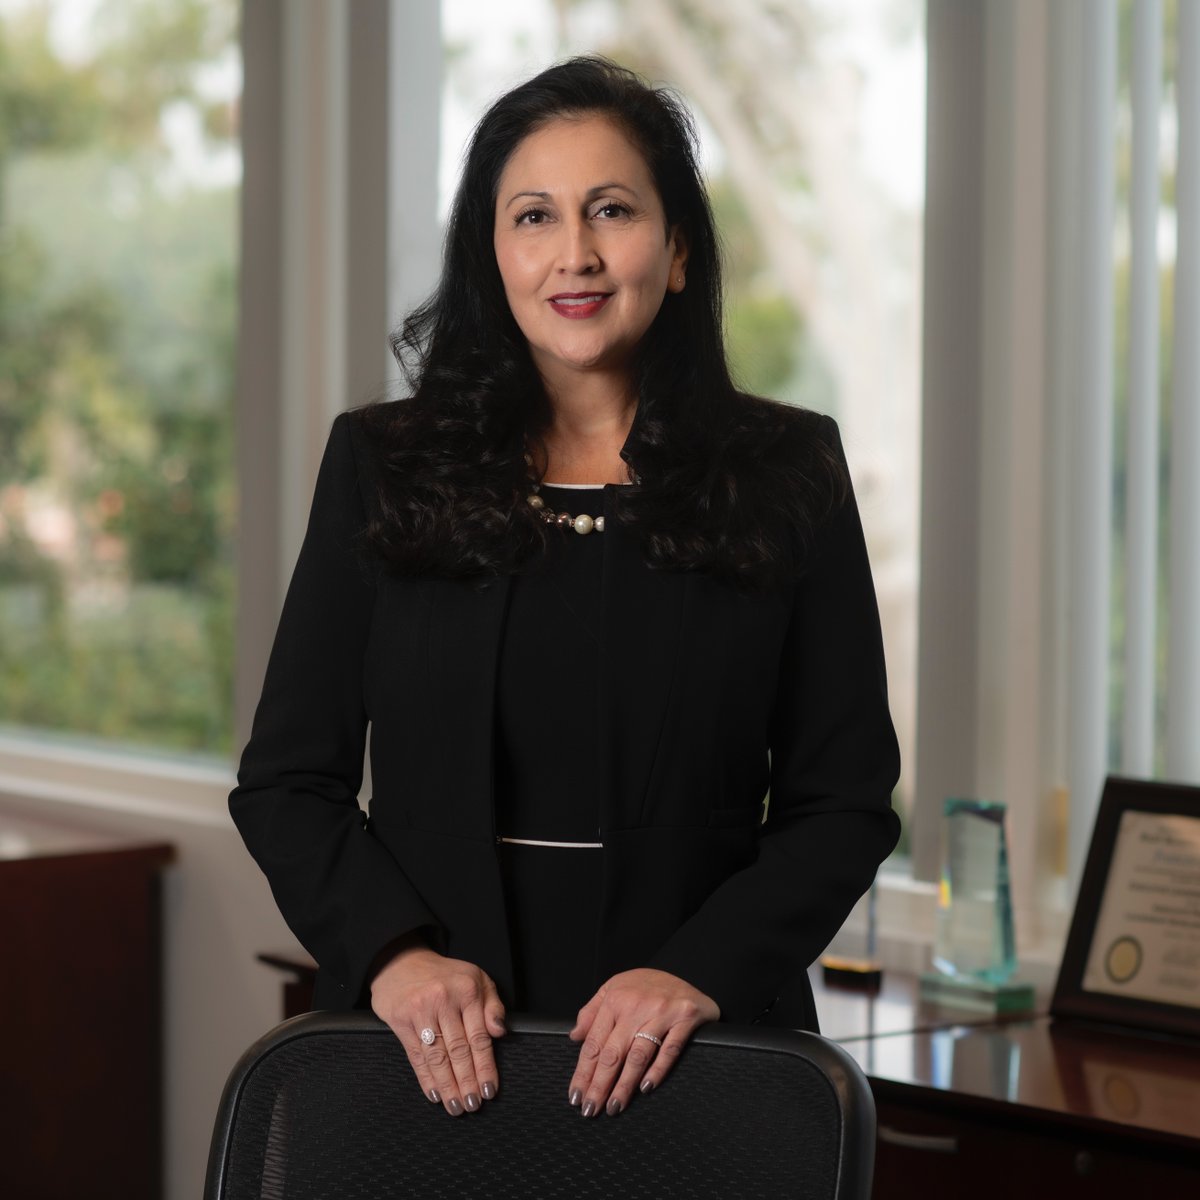 #UCIEducation Dean @DrFContreras will deliver the welcome remarks at the CAP Forum on May 1, sponsored by UC's Office of the President Graduate, Undergraduate, and Equity Affairs. The event will unite UC professionals to advance higher education for all.